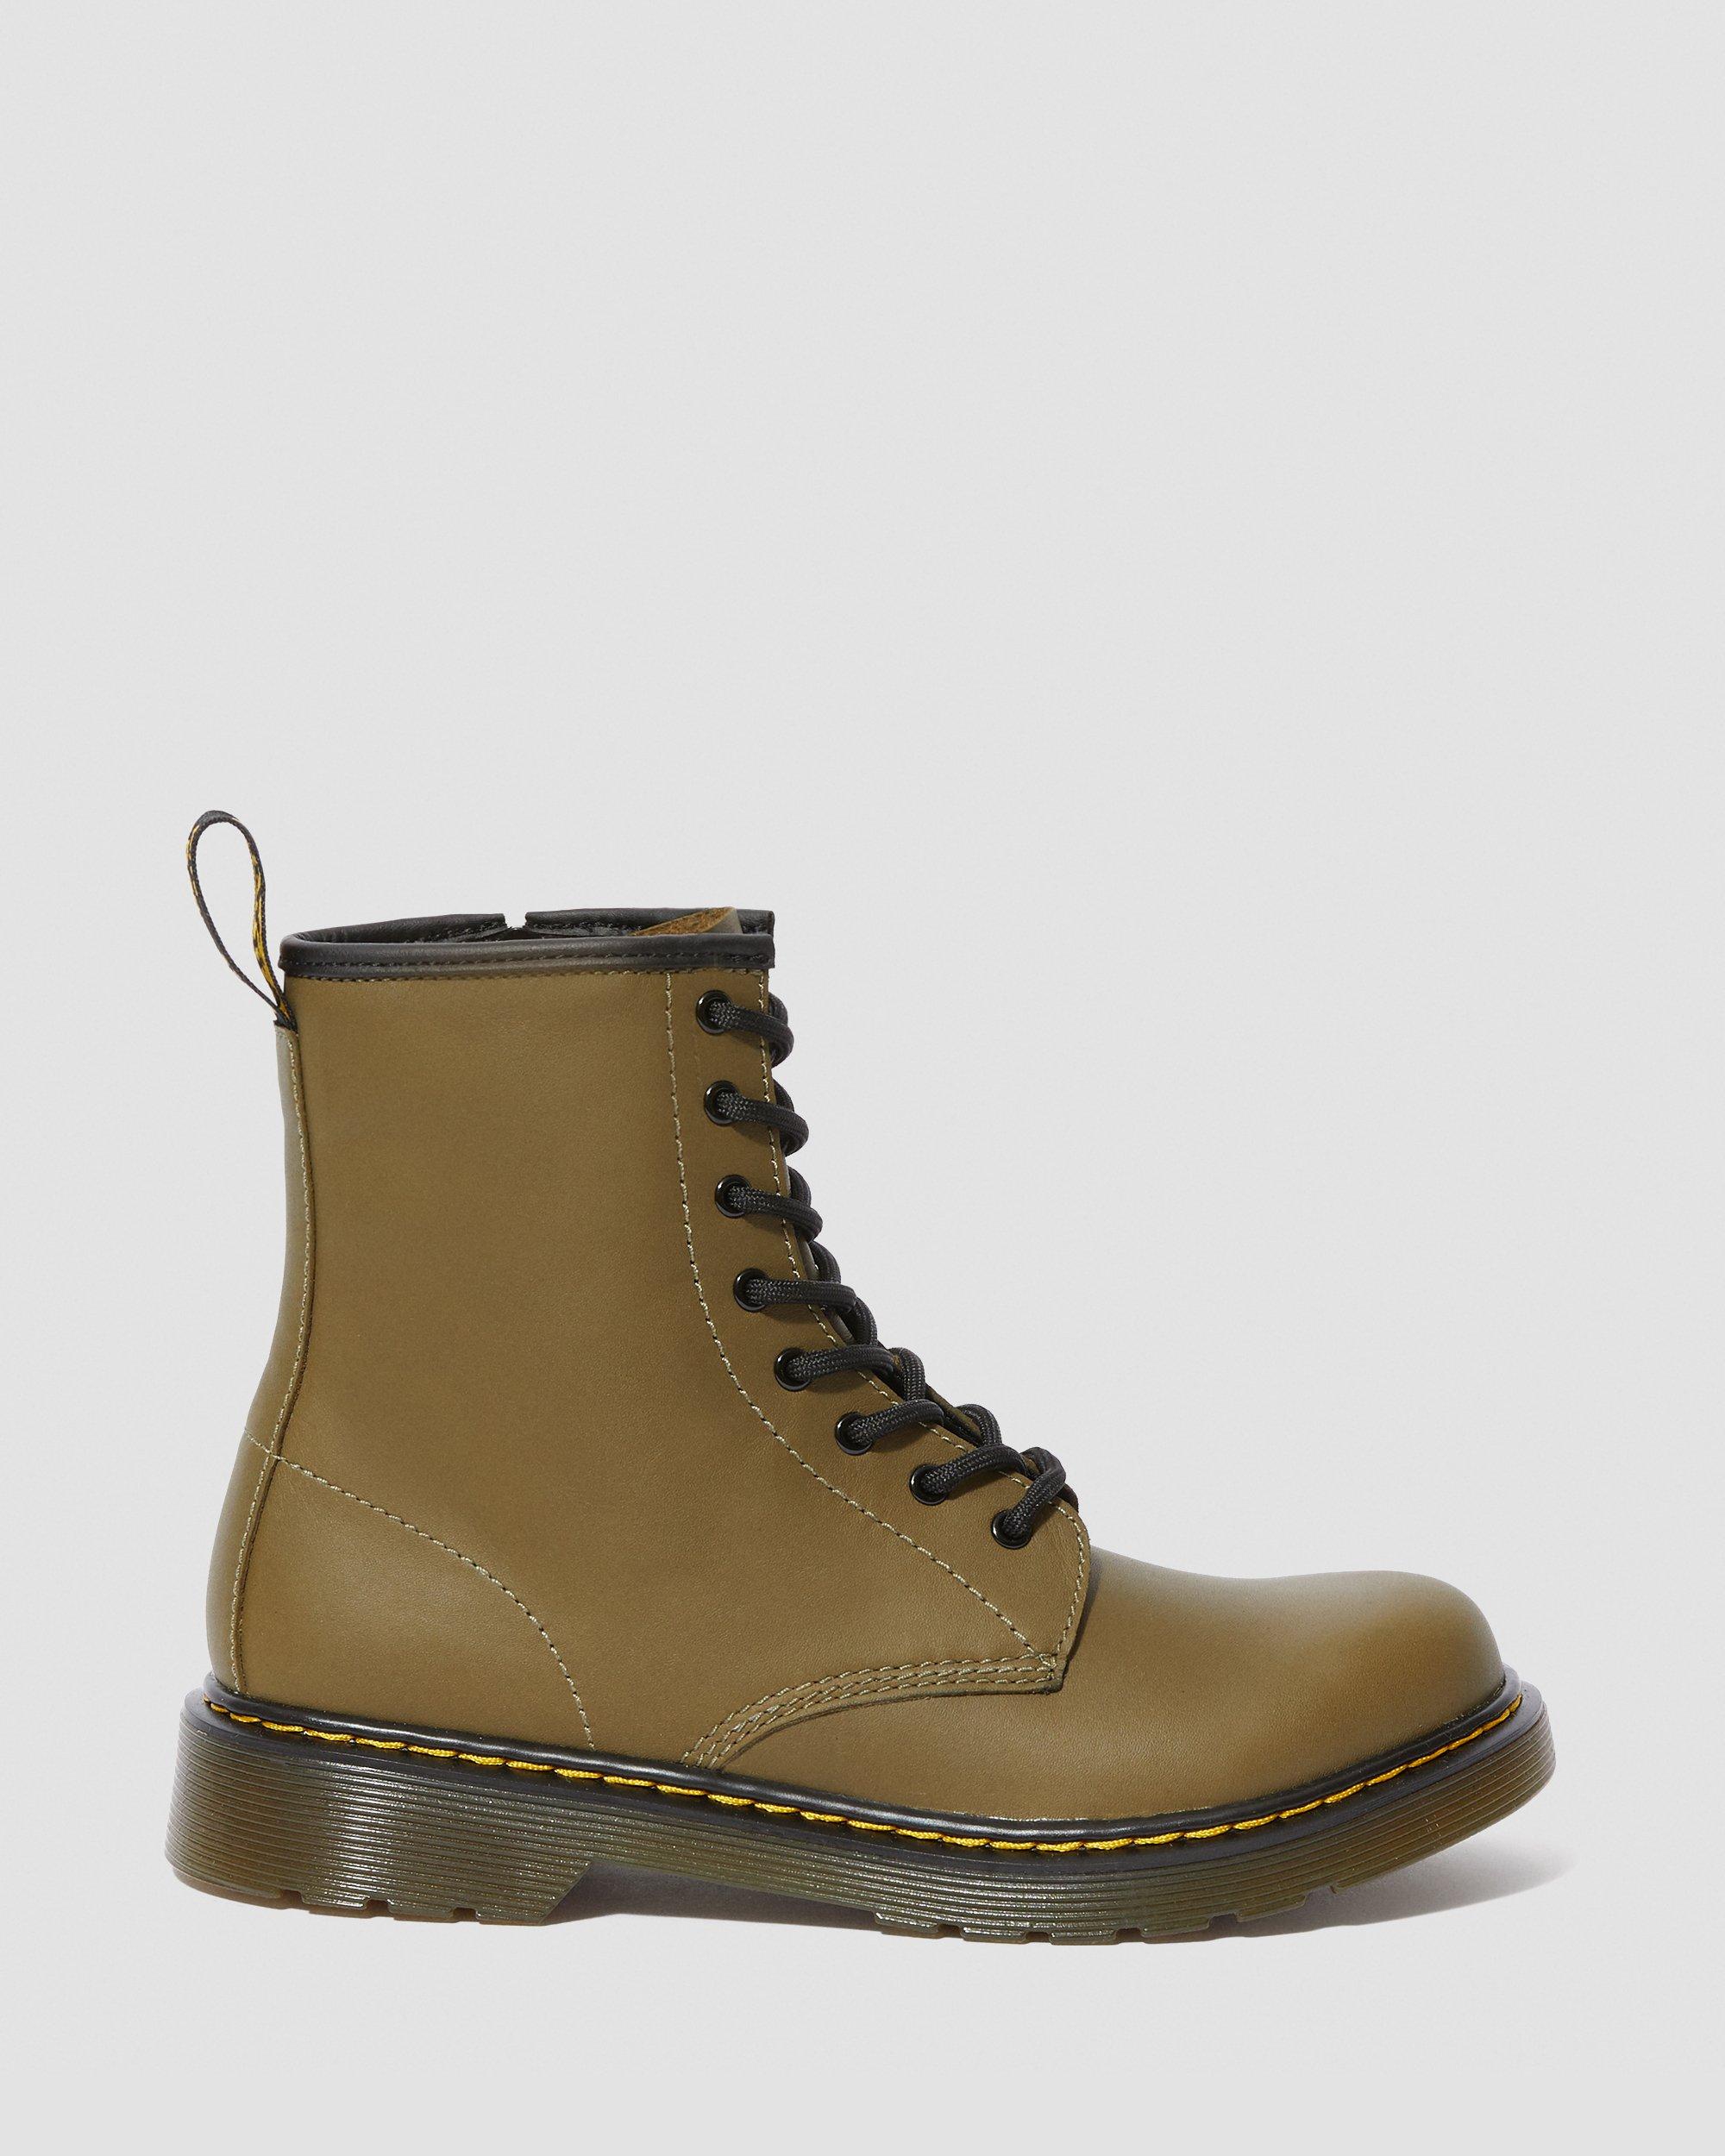 Youth 1460 Leather | in Up Martens Dr. Olive Lace Boots